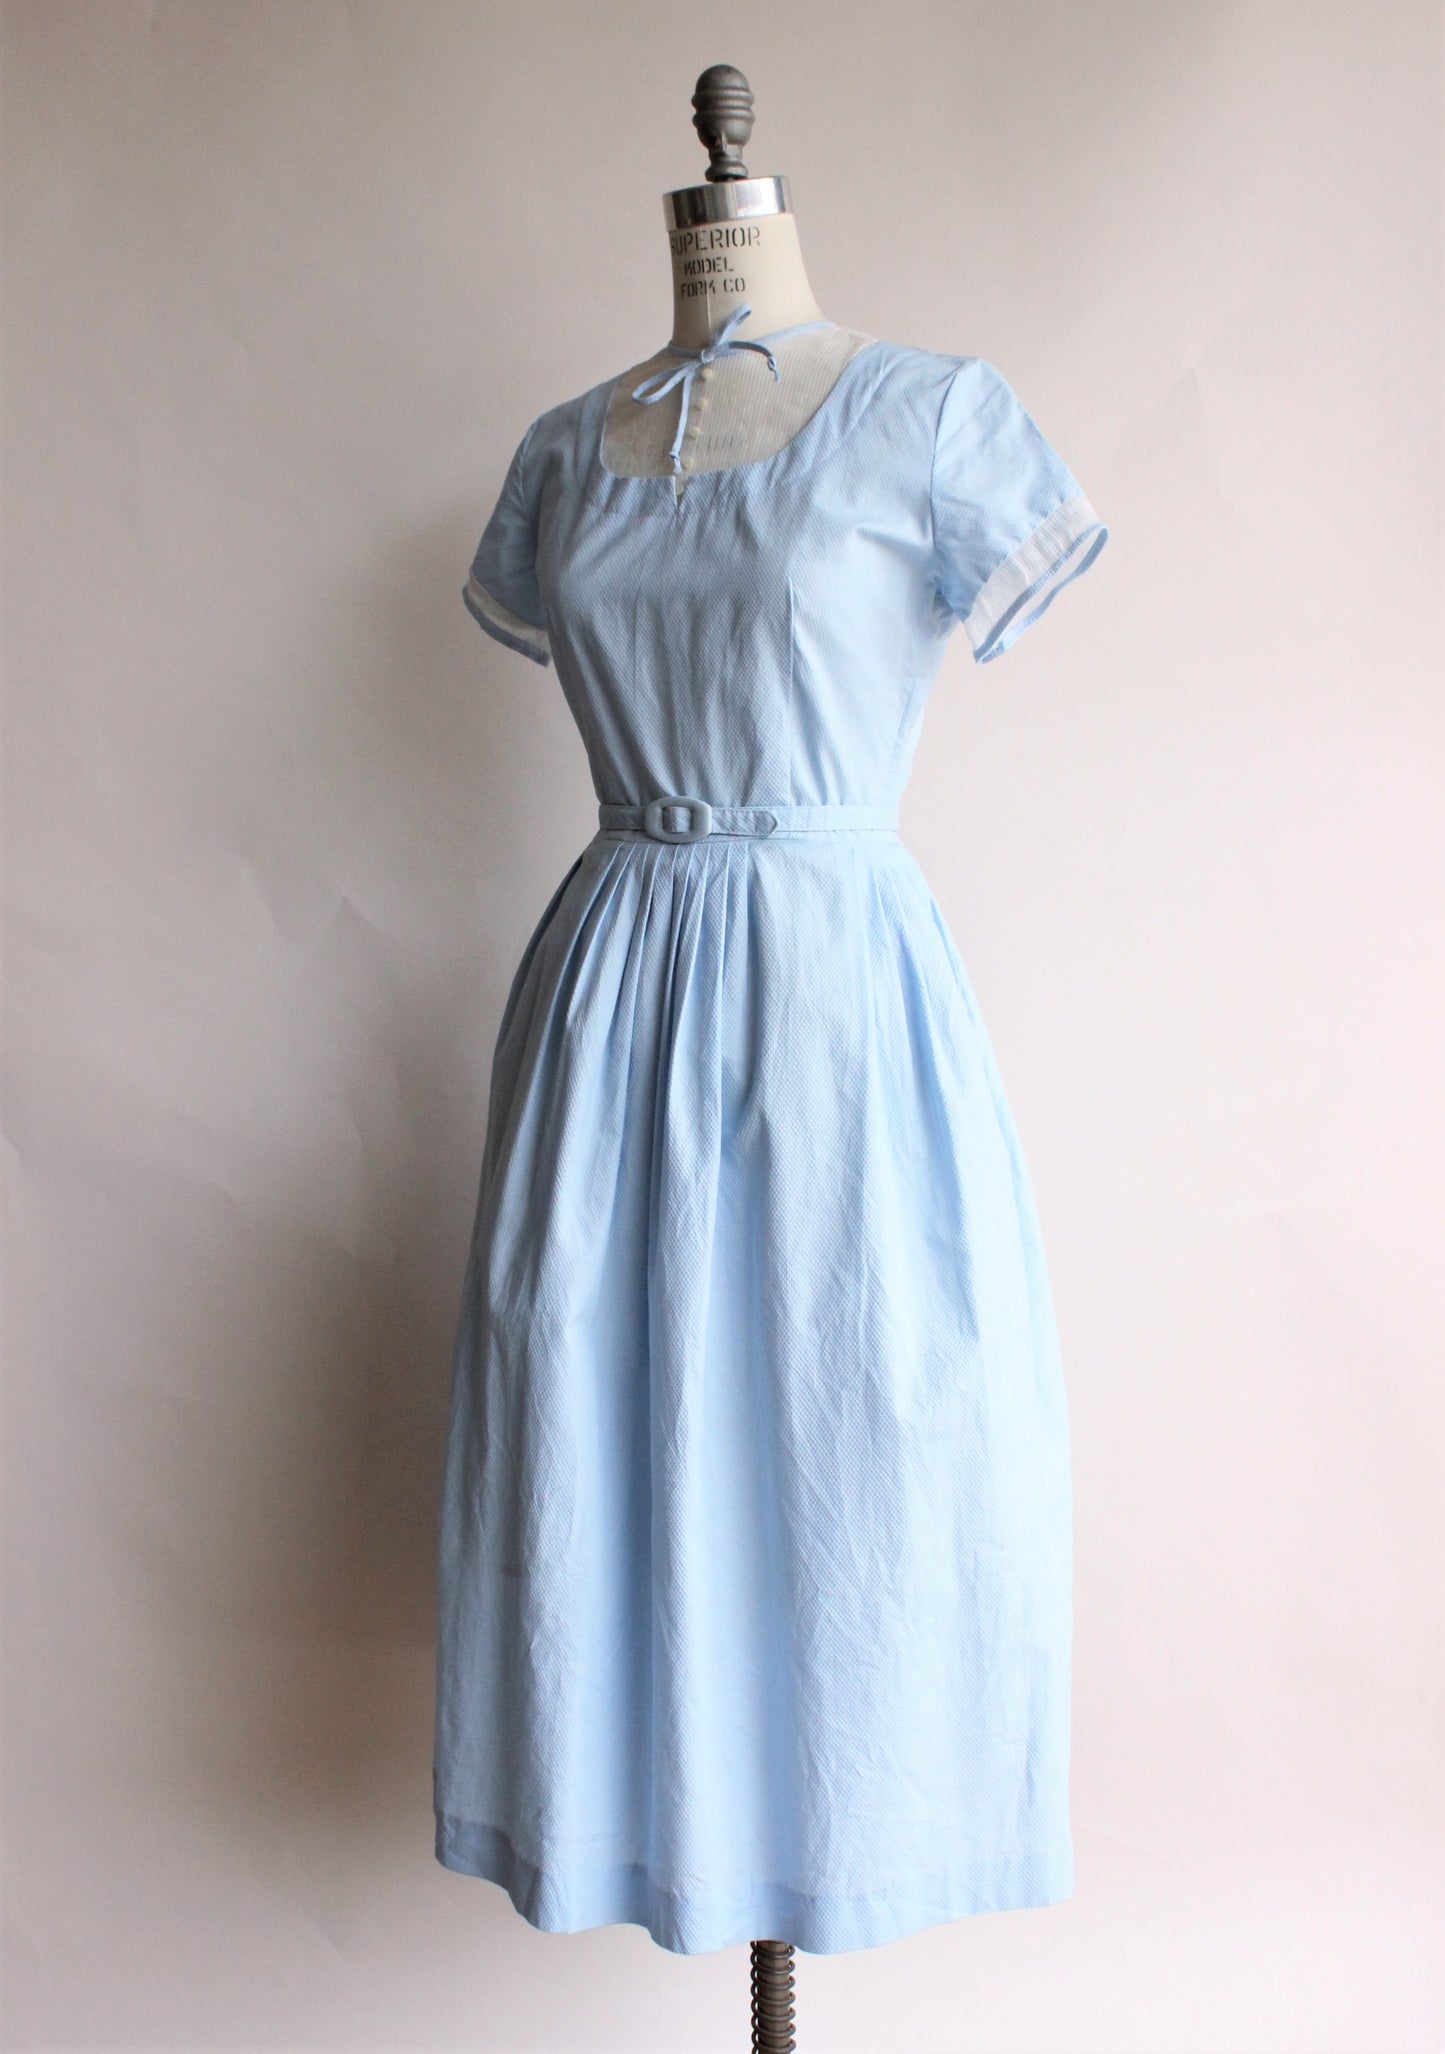 Vintage 1950s Blue Cotton Dress with White Panel